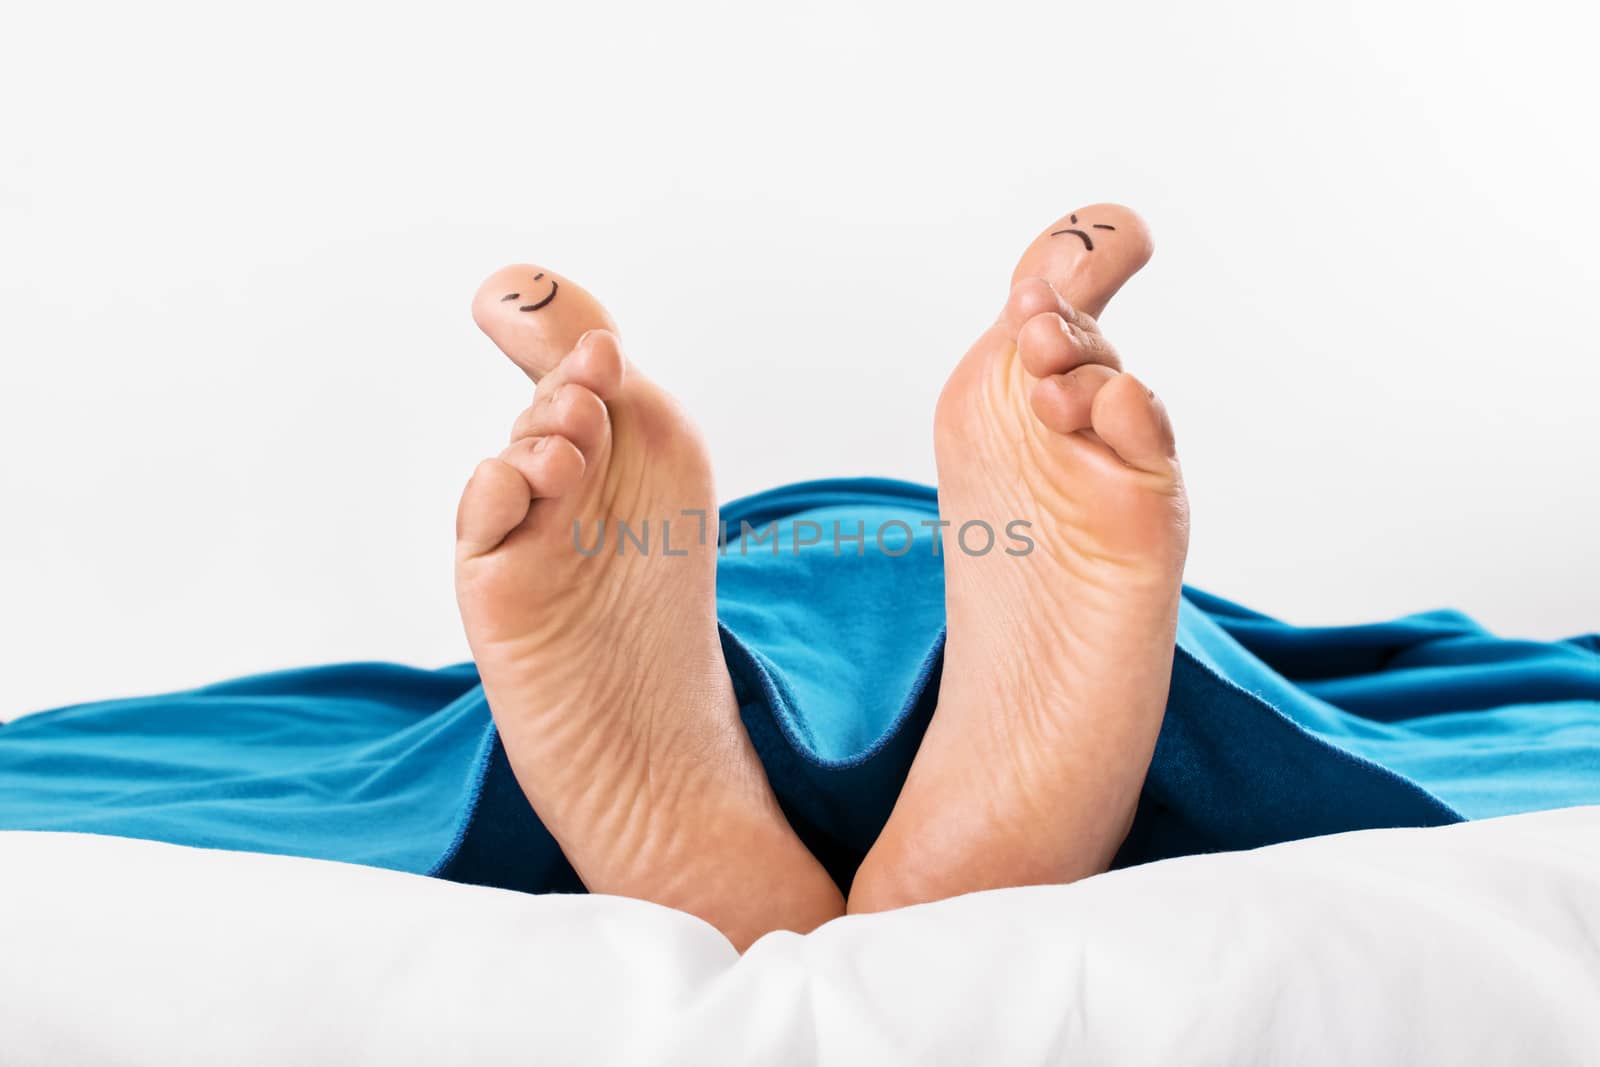 Human feet with smiley and grumpy face drawn on the toes, on white background.